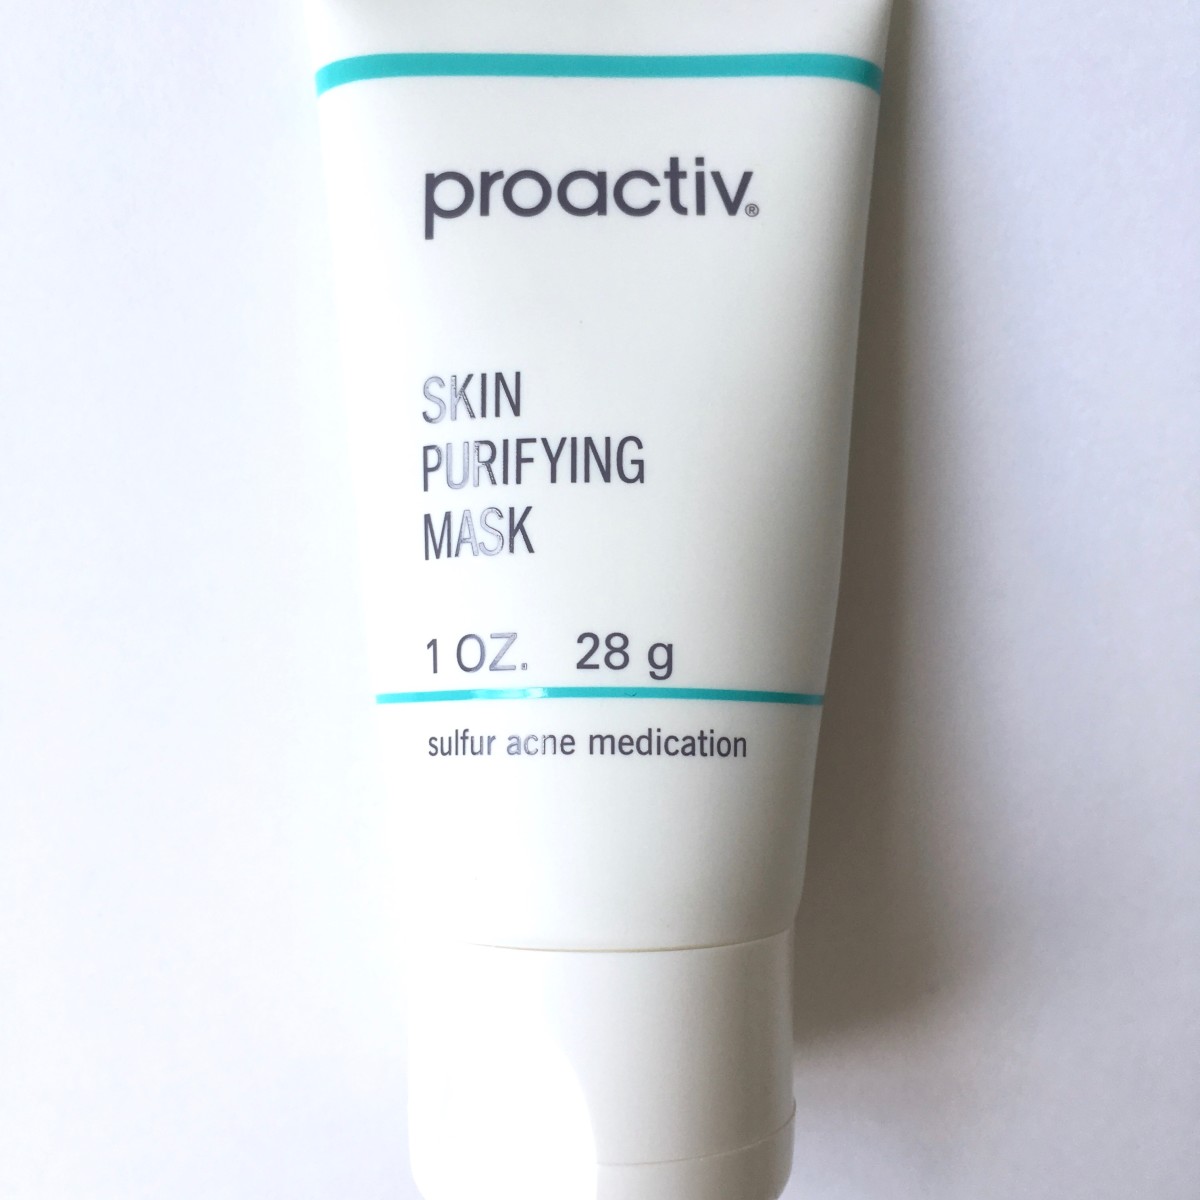 Proactiv Solution Skin Purifying Mask - This mask is great as a full-face mask or as a spot treatment.